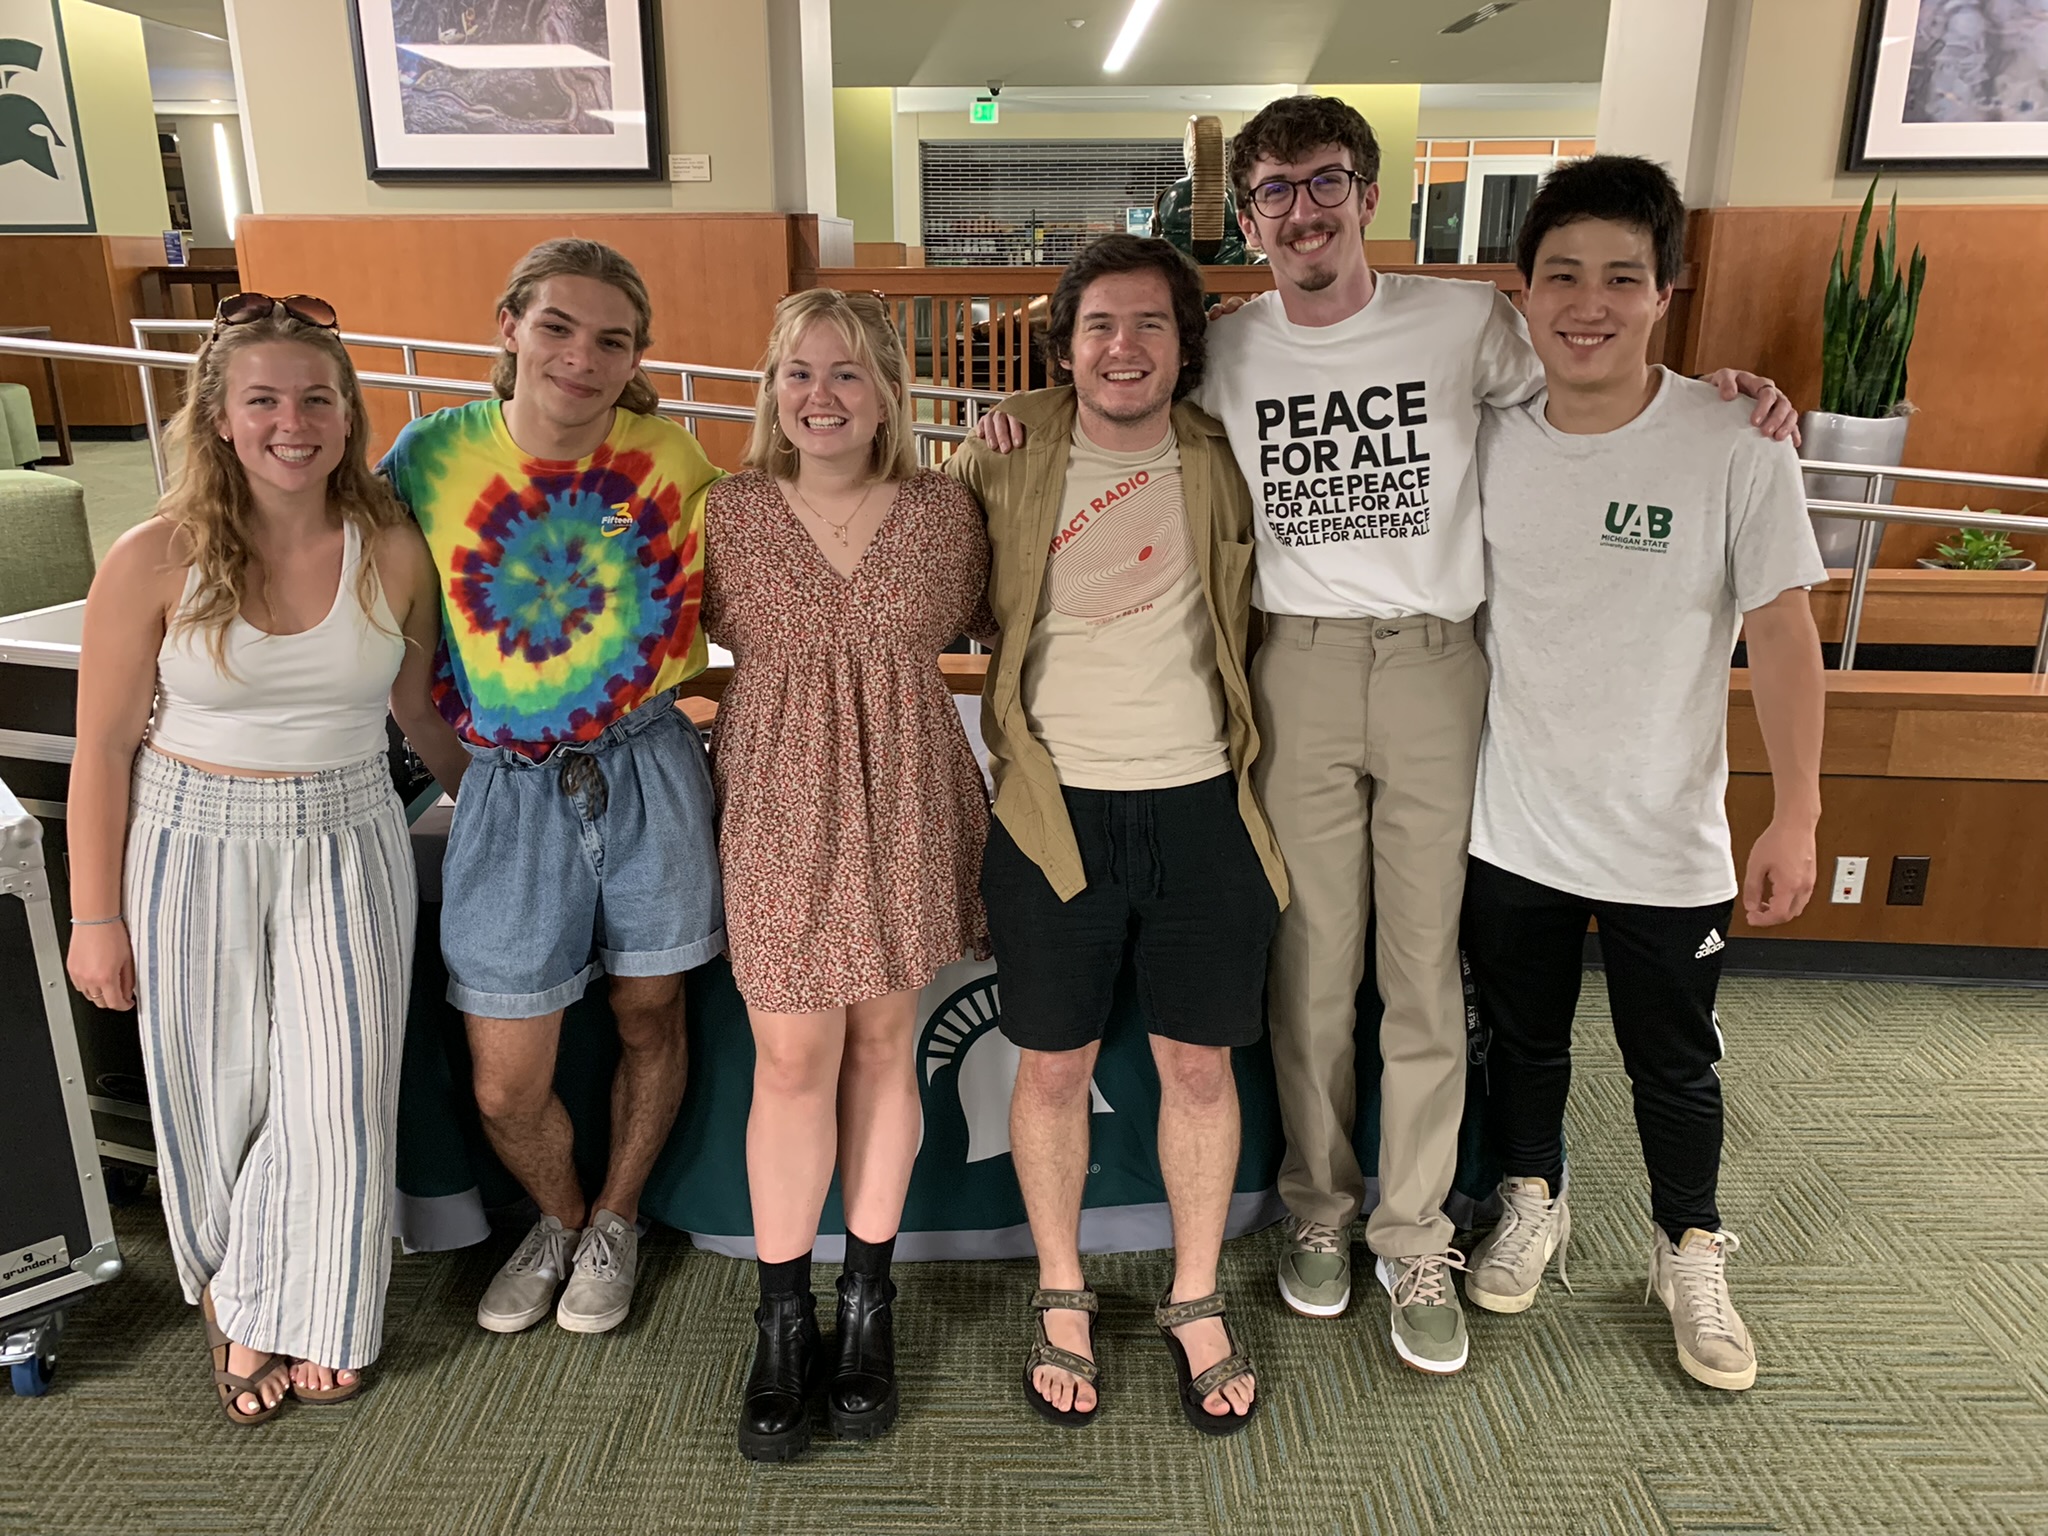 UAB and Impact student team members stand together in the Union Main Lounge